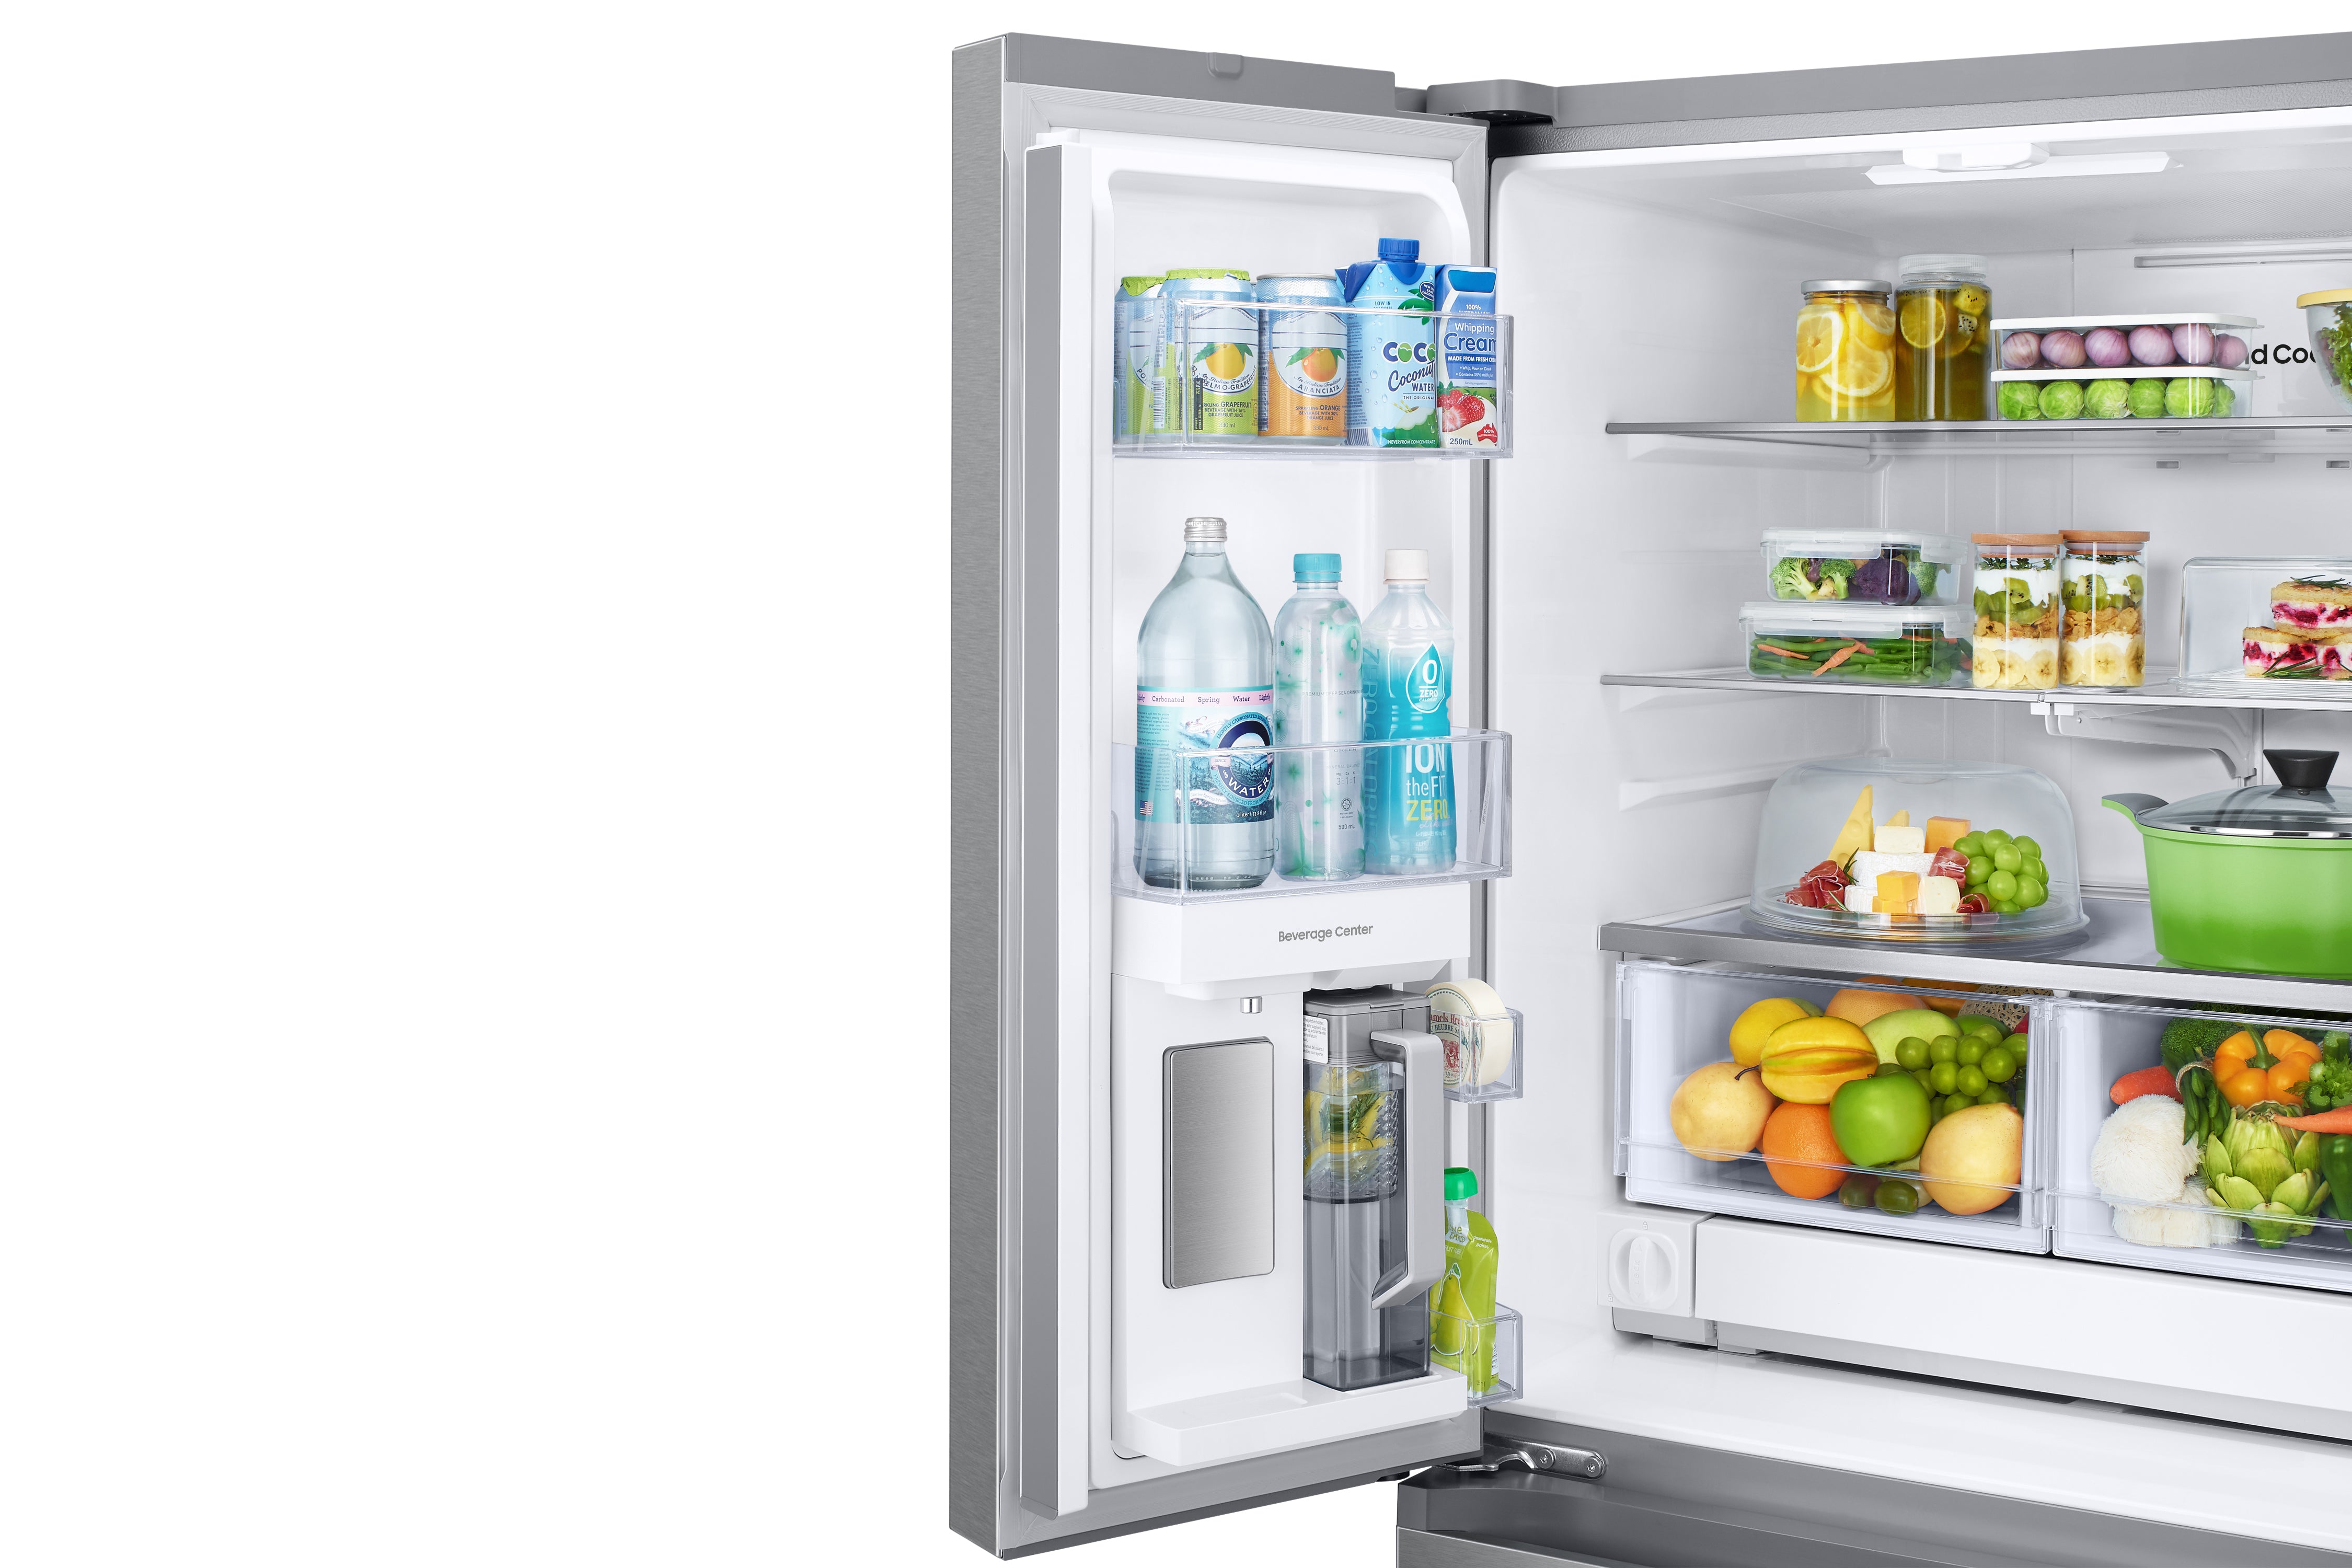 Samsung - 32.1875 Inch 24.5 cu. ft French Door Refrigerator in Stainless - RF25C5551SR